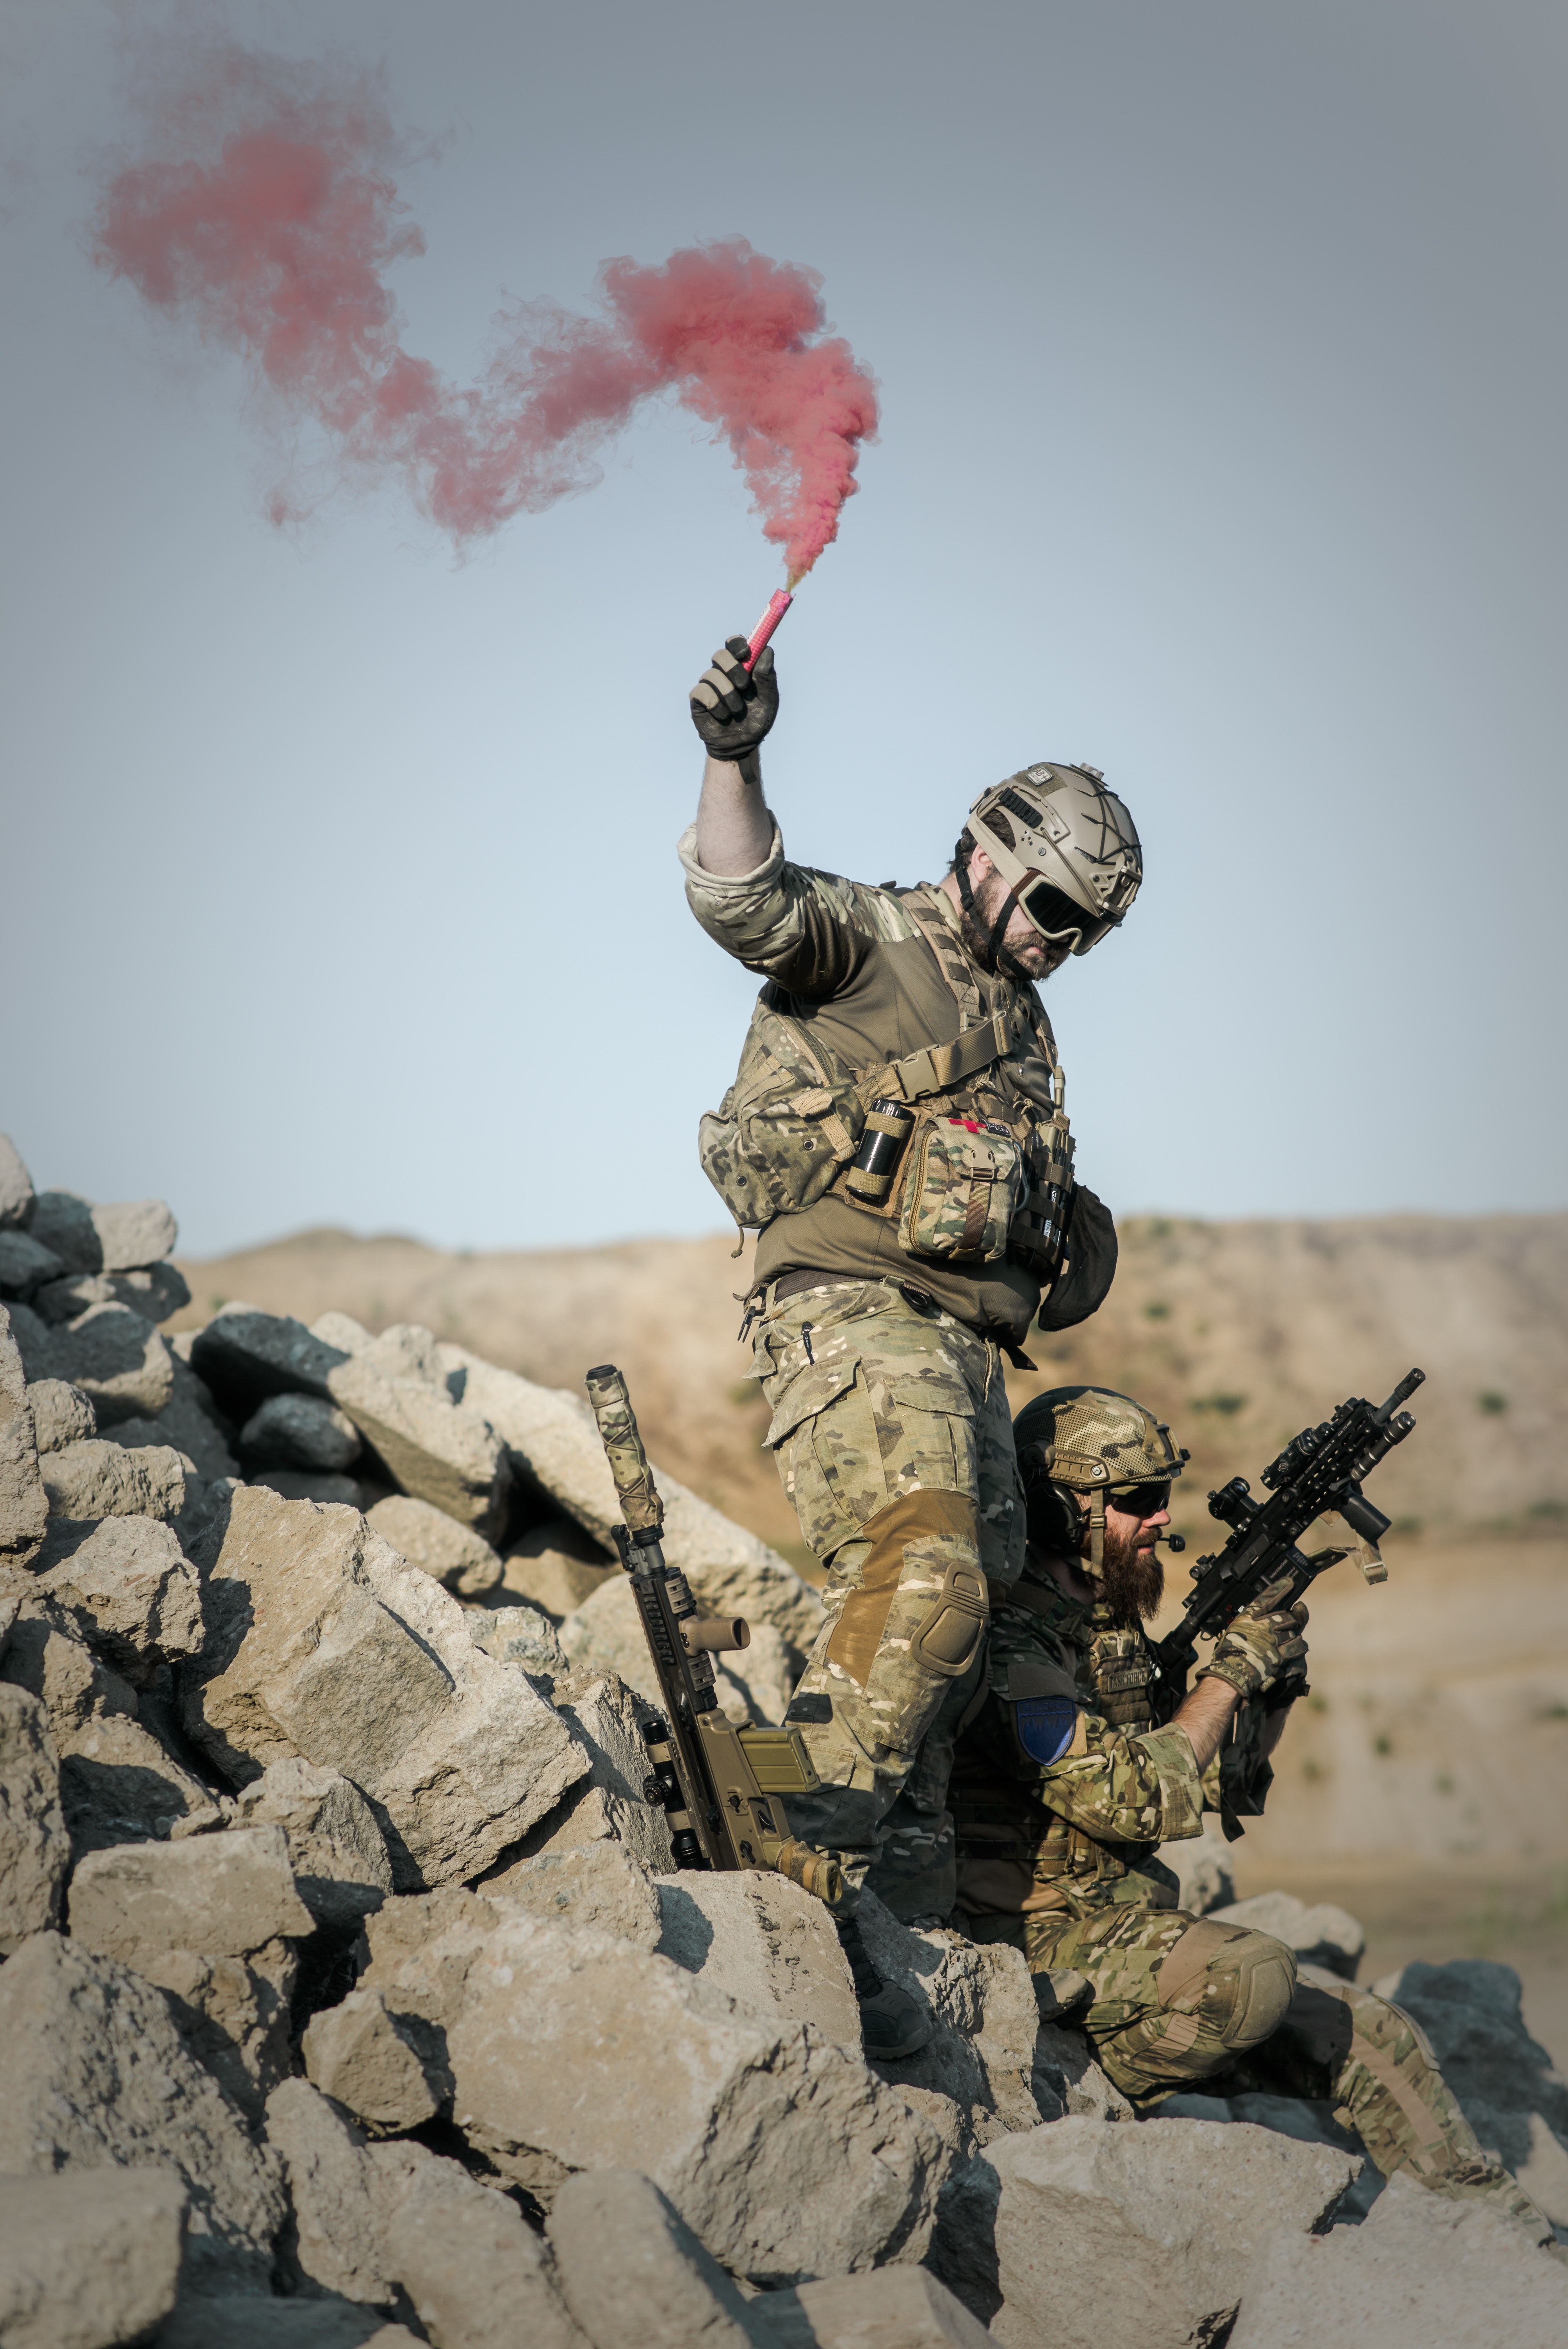 2 Soldier With Guns on Grey Pile of Rocks Holding Smoke Stick during Daytime, Action, Police, Uniform, Team, HQ Photo